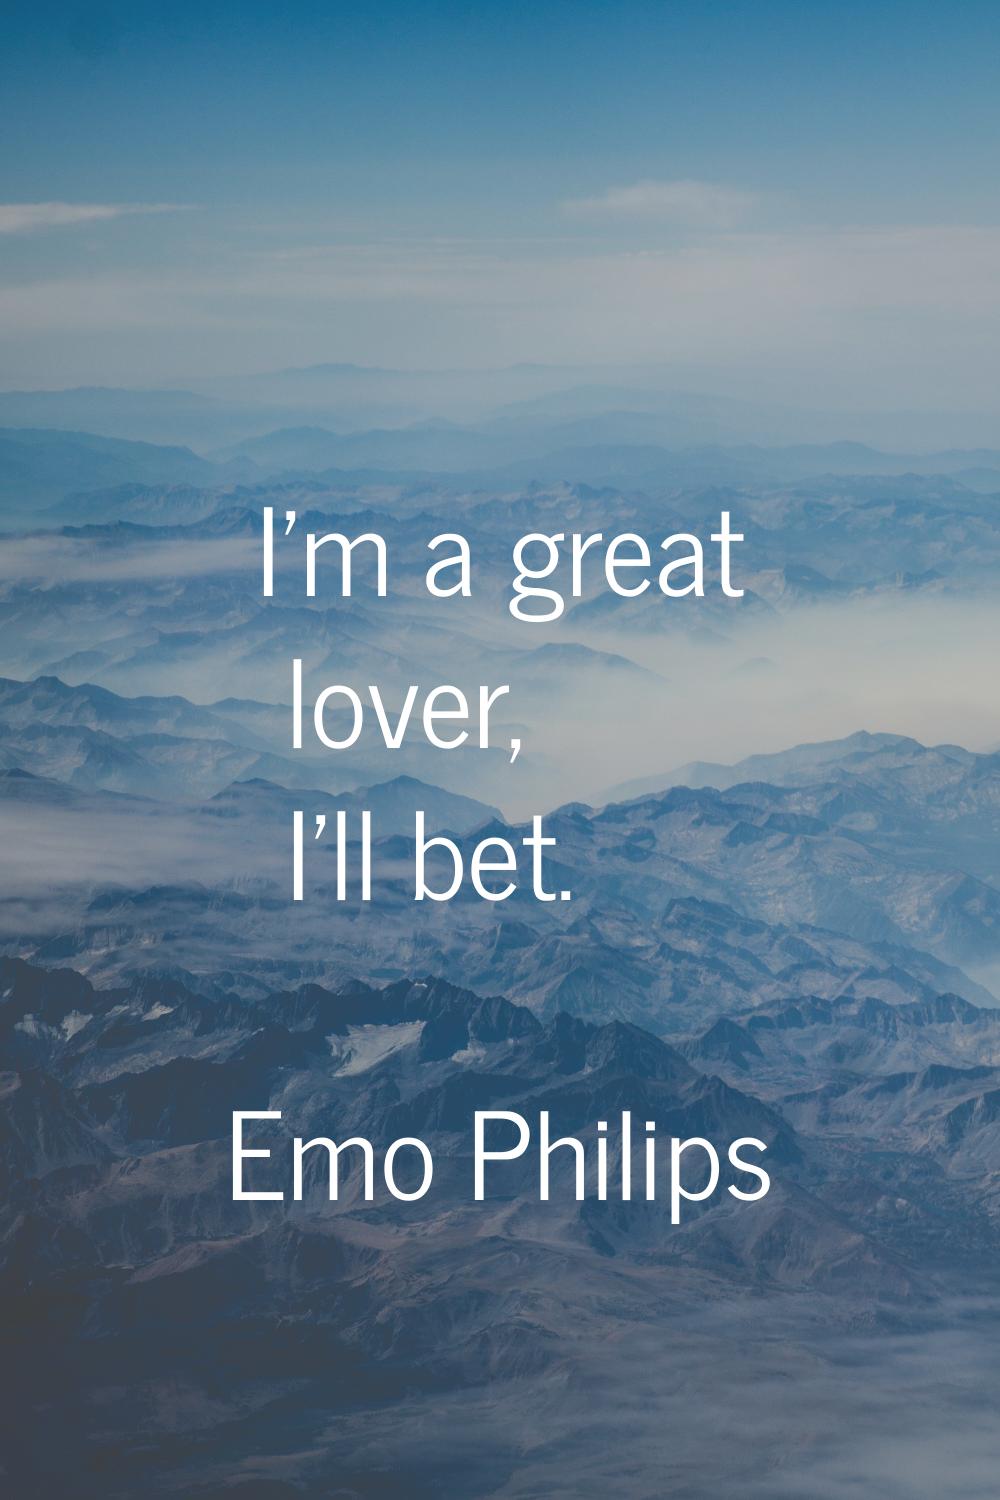 I'm a great lover, I'll bet.